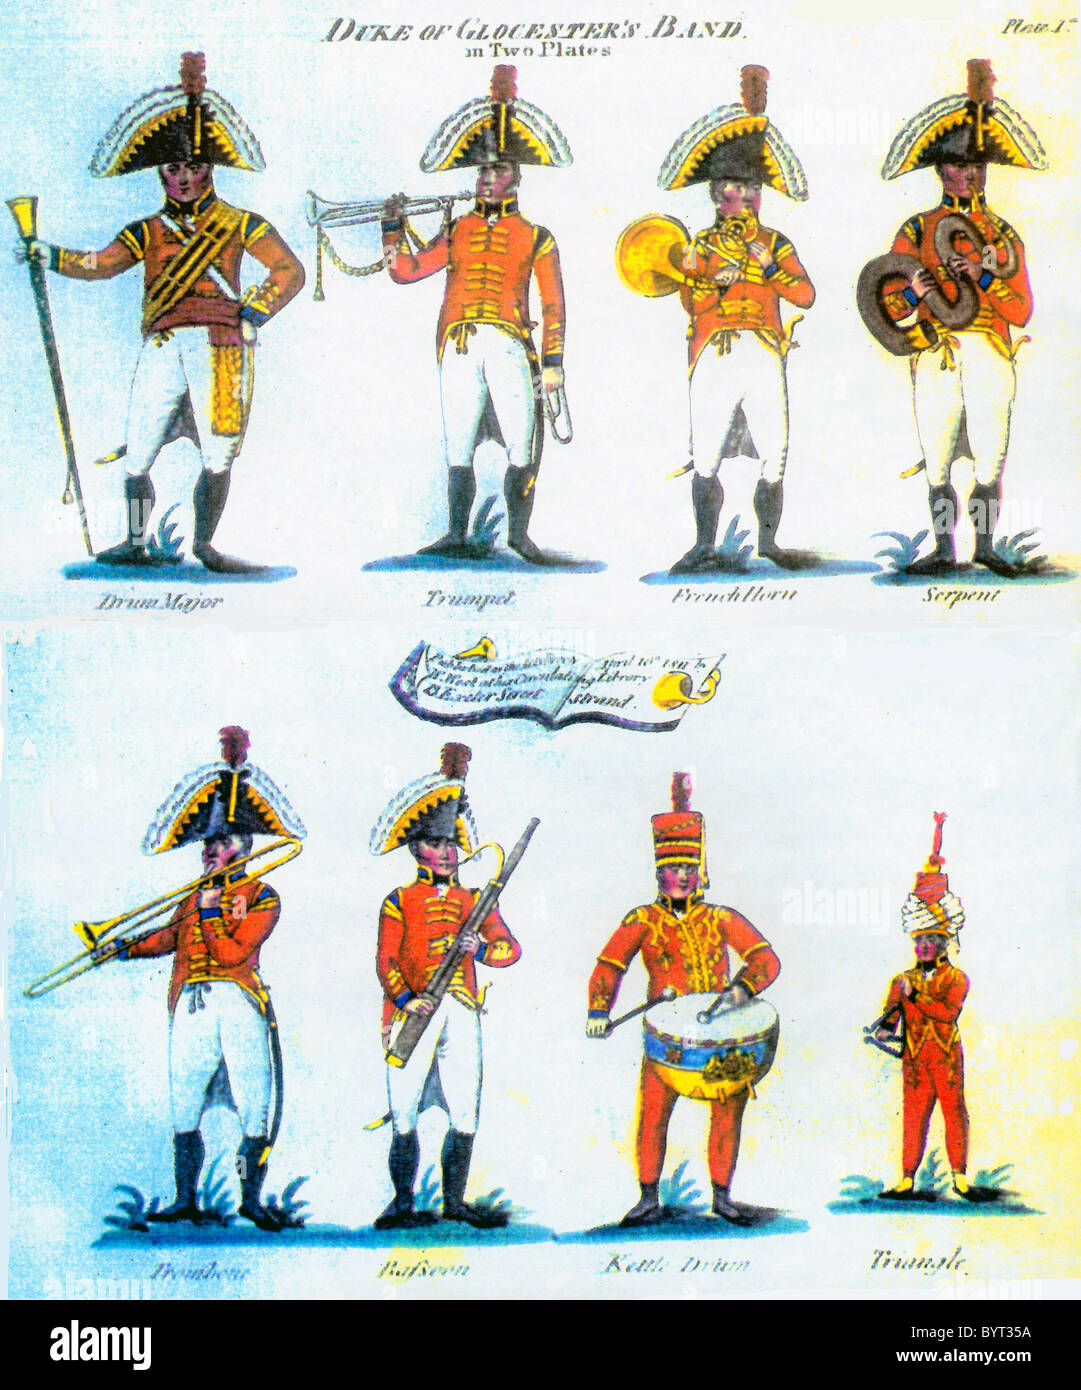 Illustrative poster showing Duke of Glocester's band Stock Photo